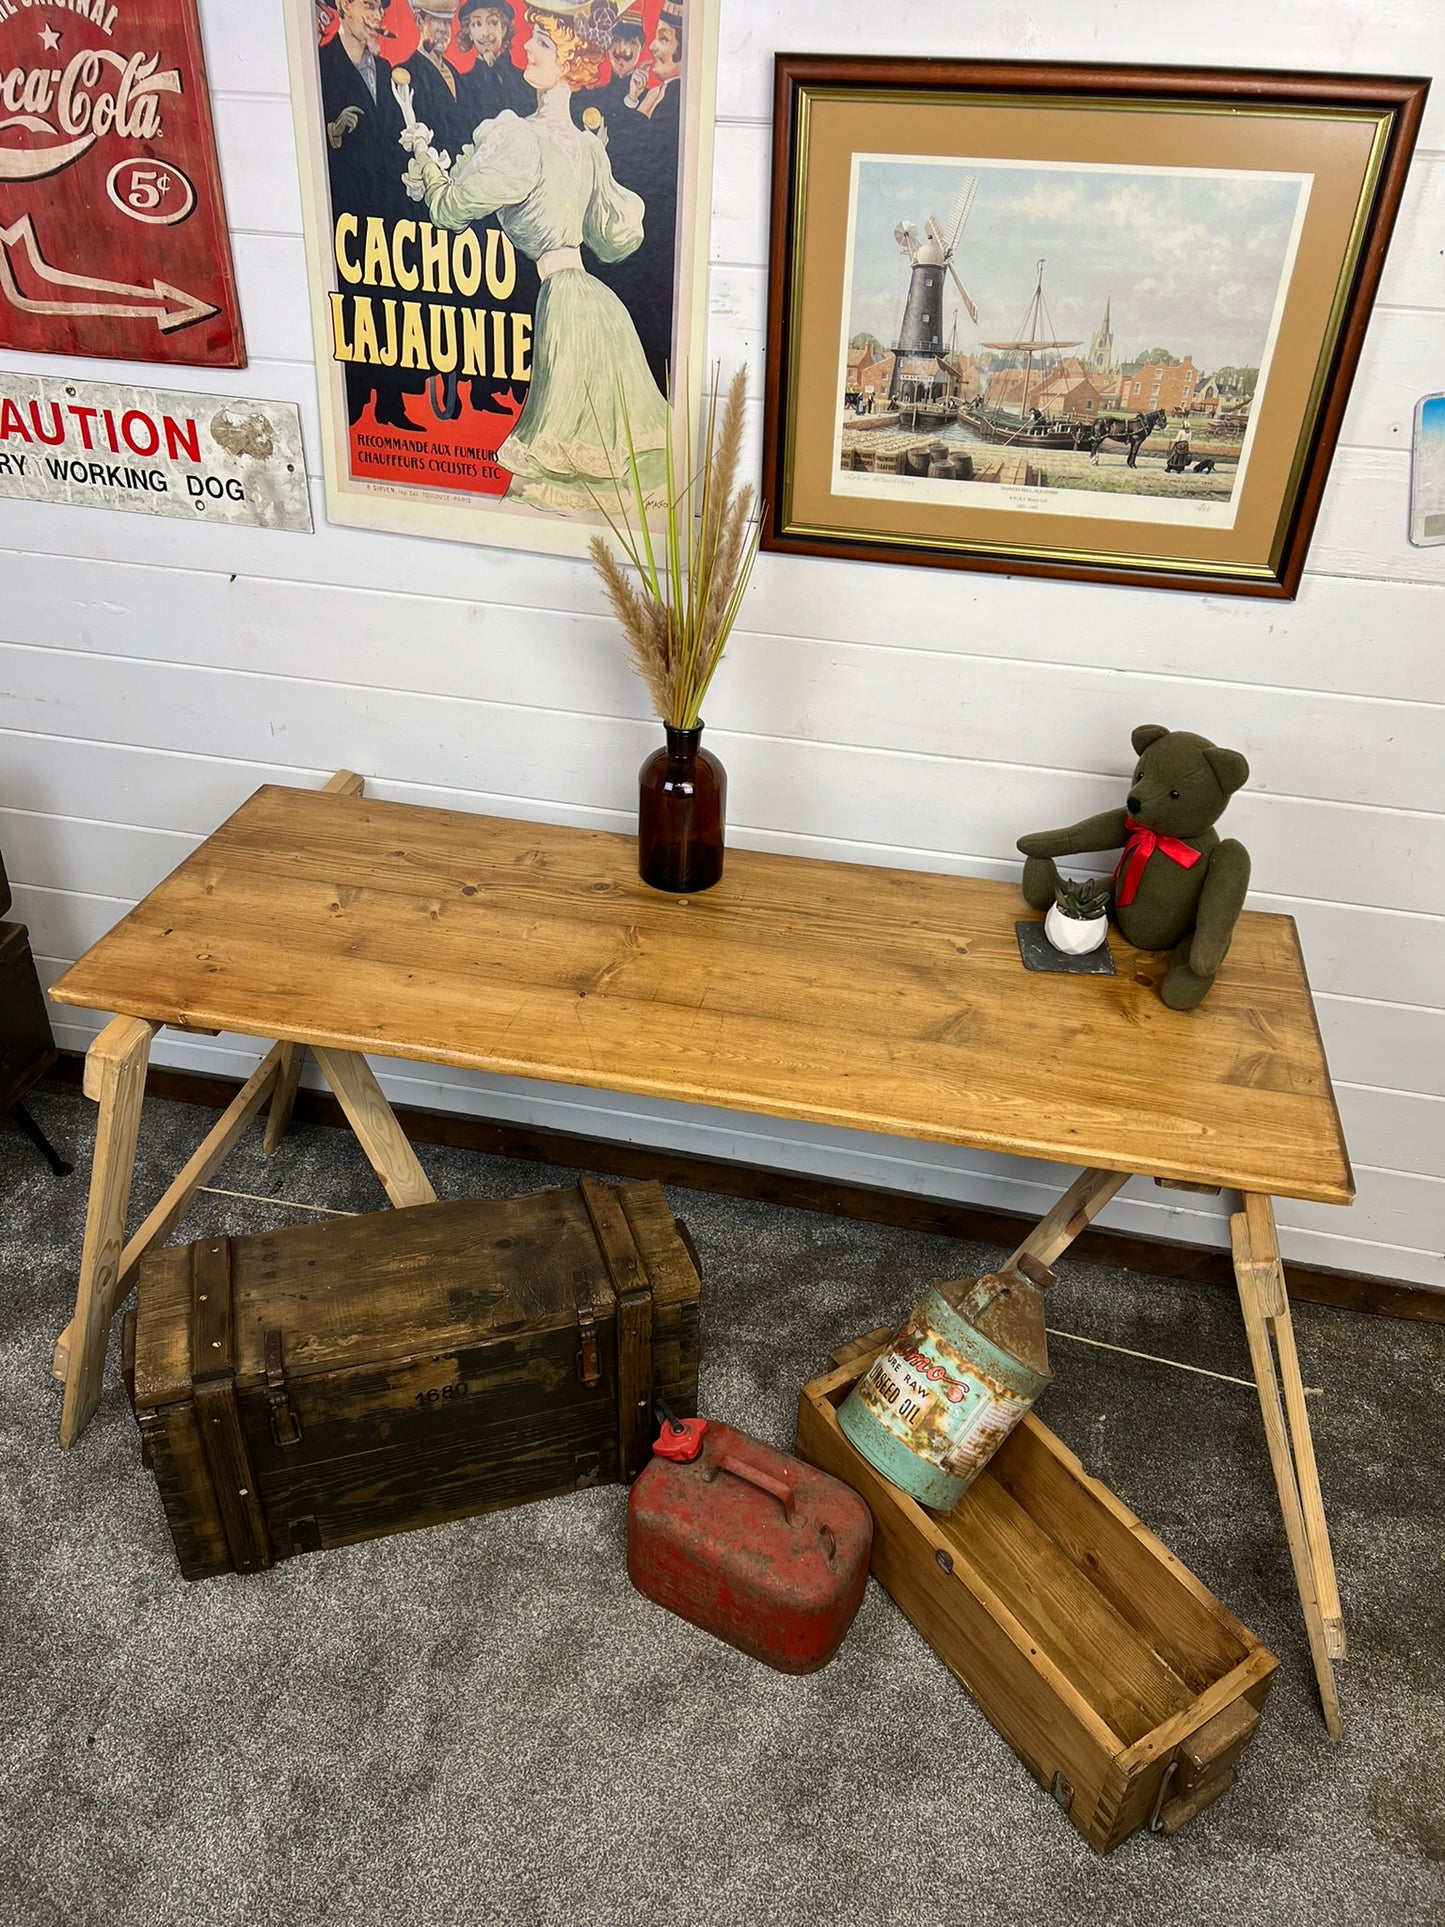 Rustic Industrial Small Wooden Table Top Vintage Desk Top Trestle Table Farmhouse Decor Chic